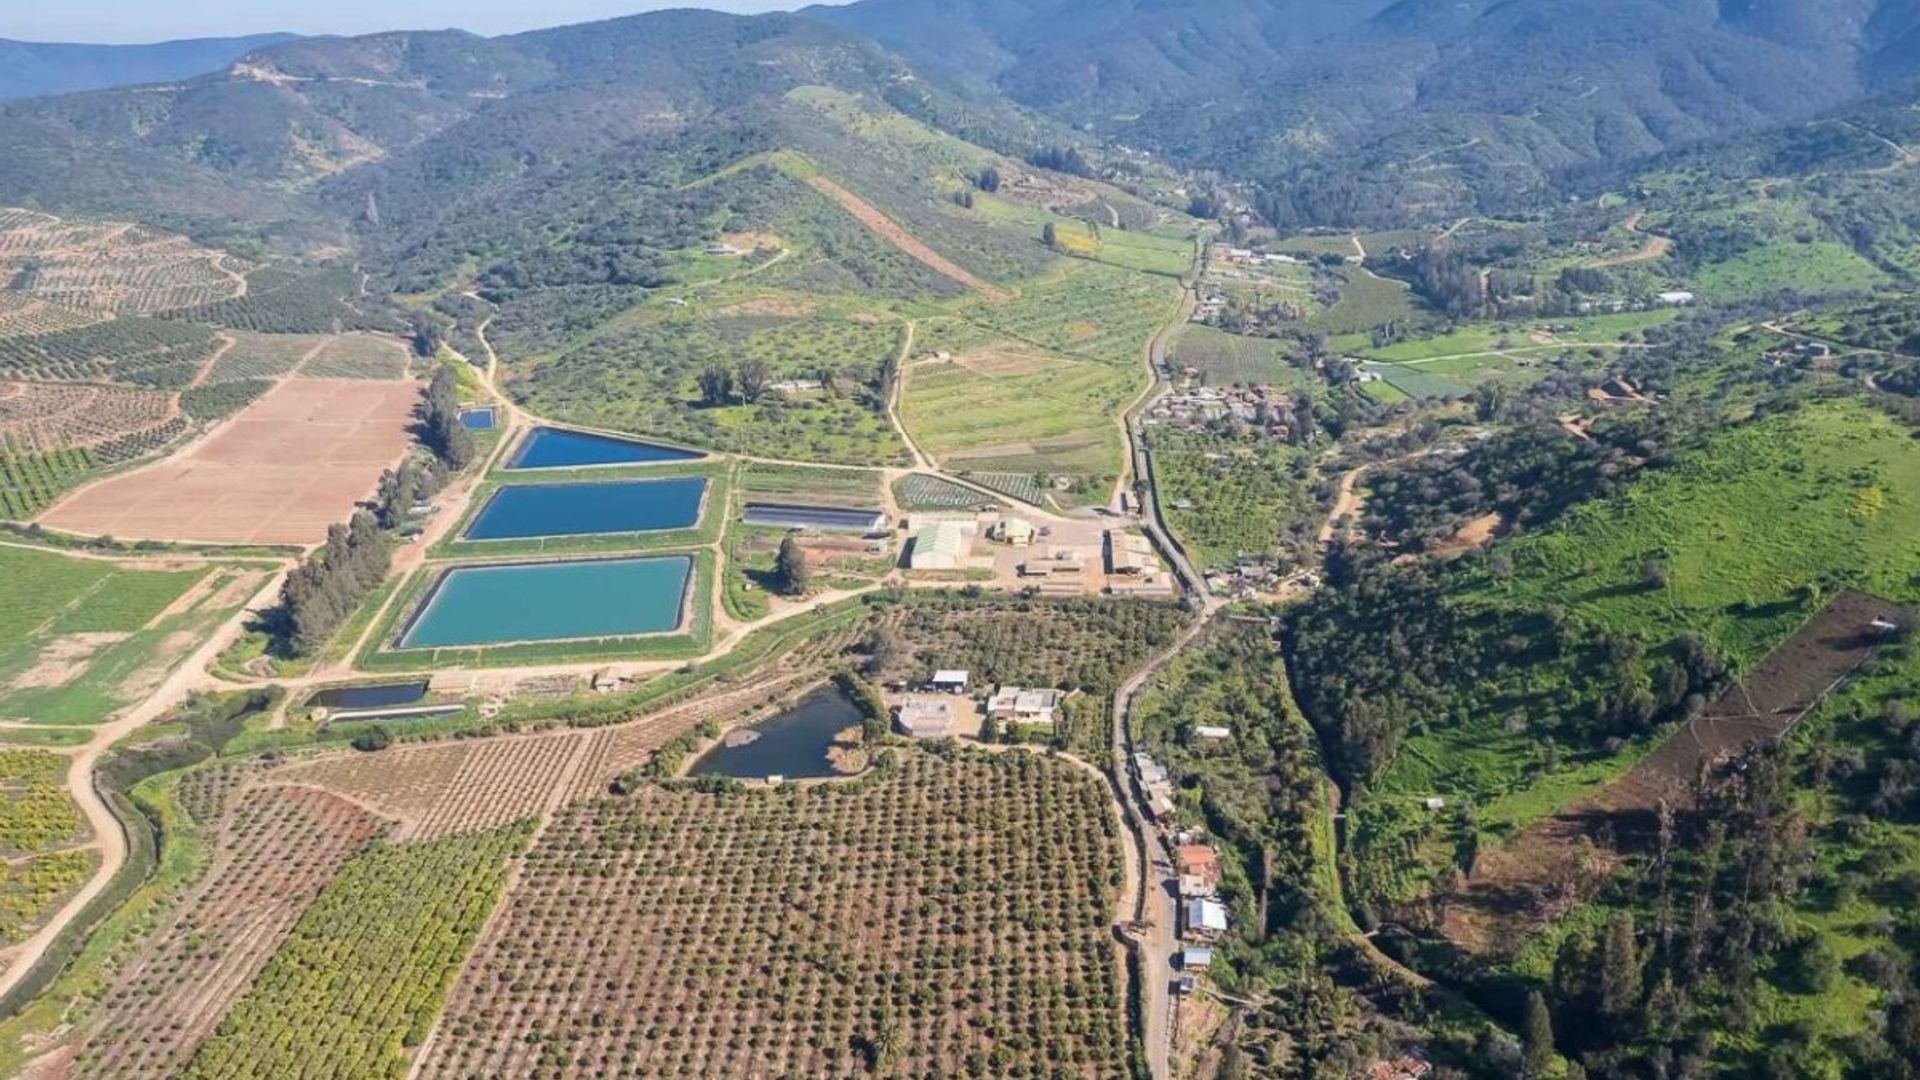 Image of a large-scale agriculture operation from above